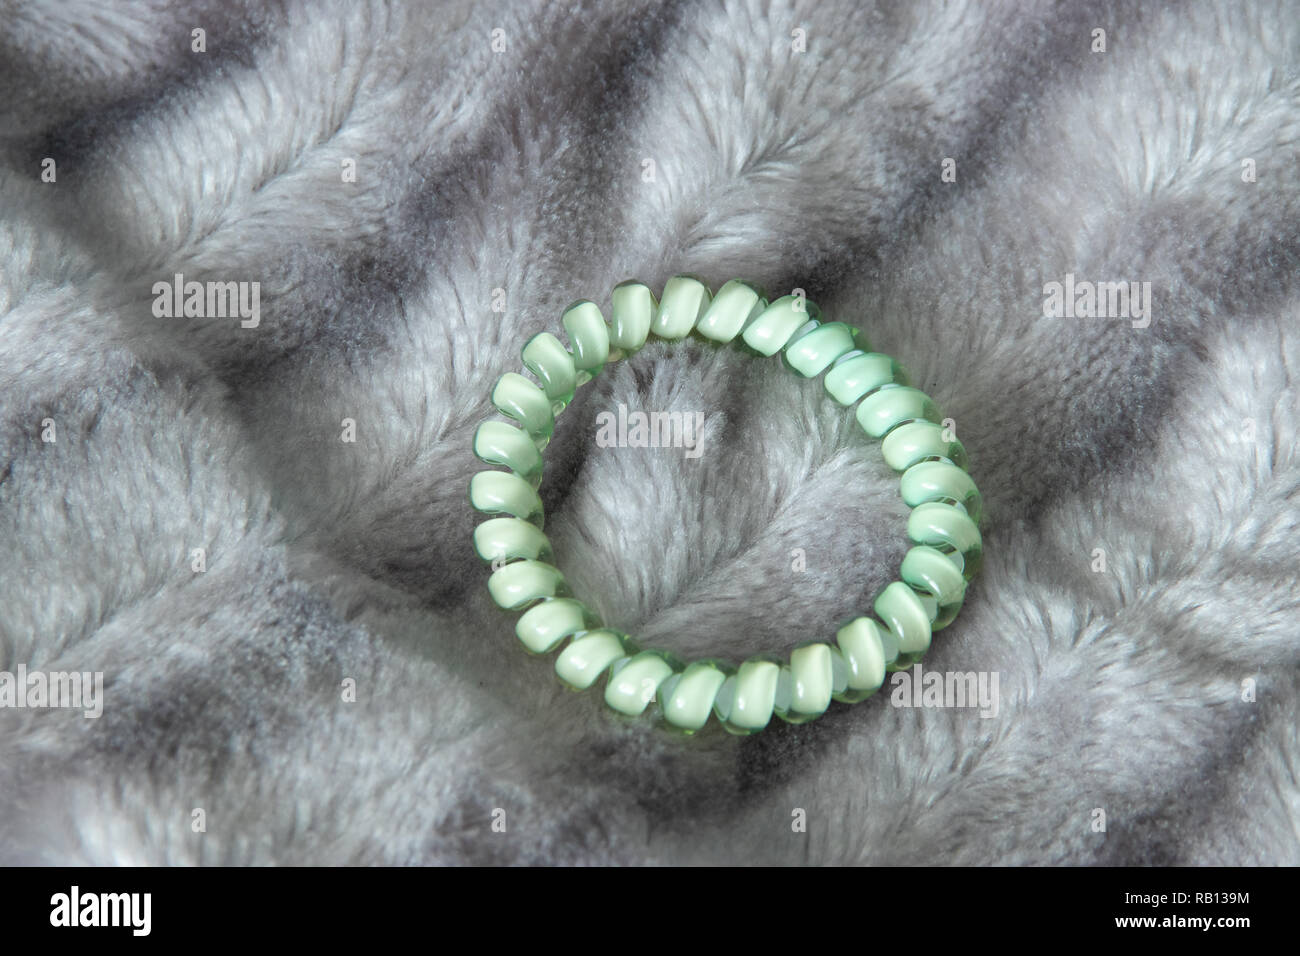 One light green blue scrunchy hair tie elastic spring on the silver gray fluffy faux fur blanket background Stock Photo